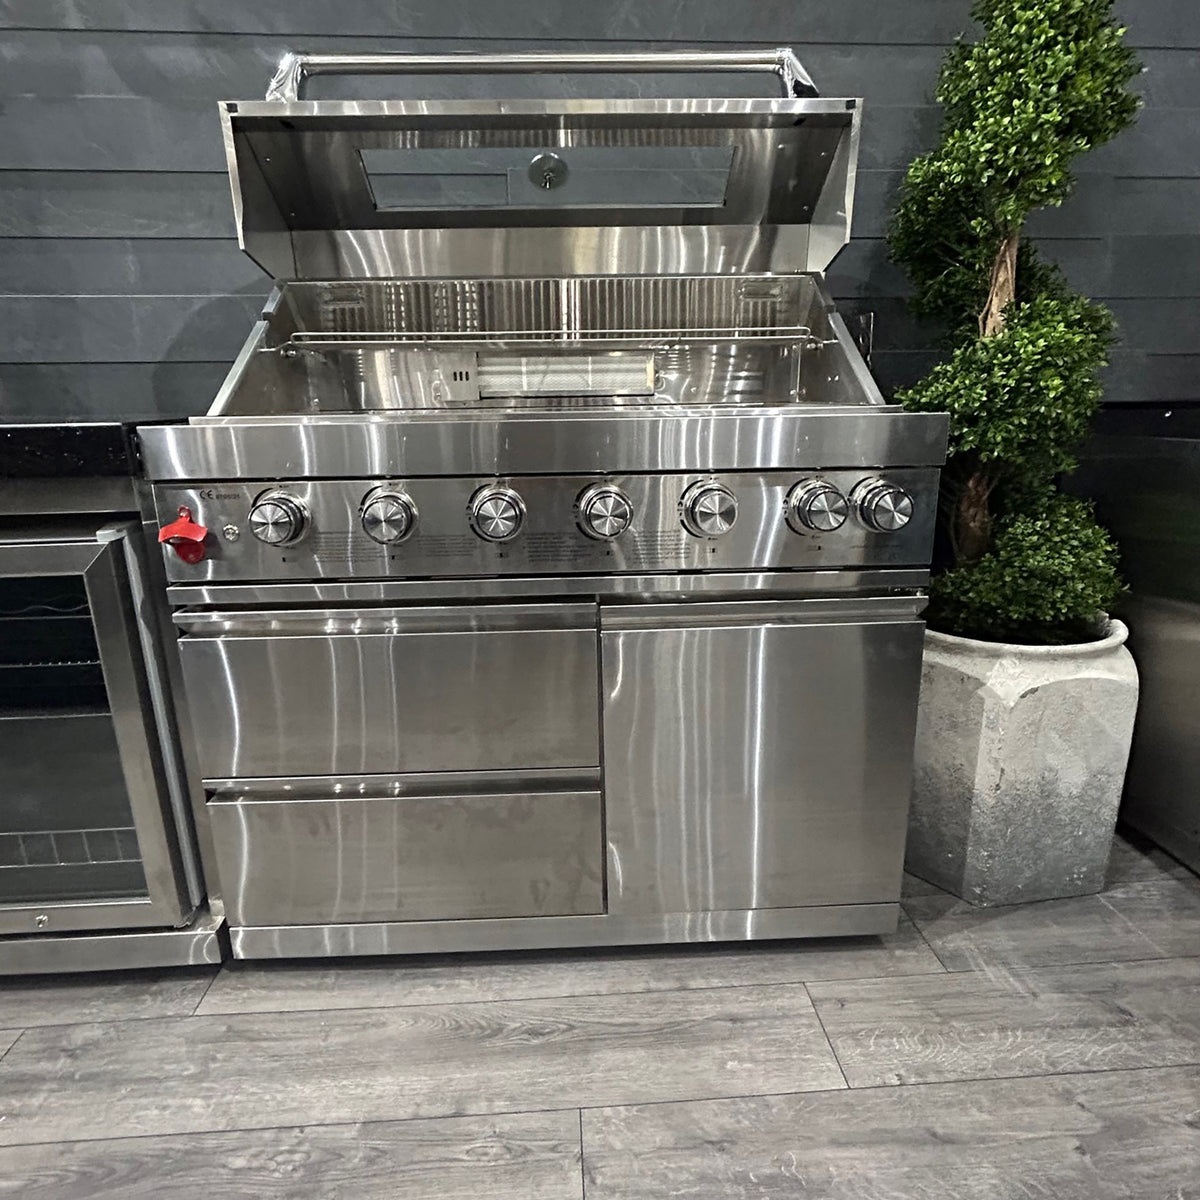 Ex Display Draco Grills 6 Burner Stainless Steel Outdoor Kitchen with Sink and Fridge Unit